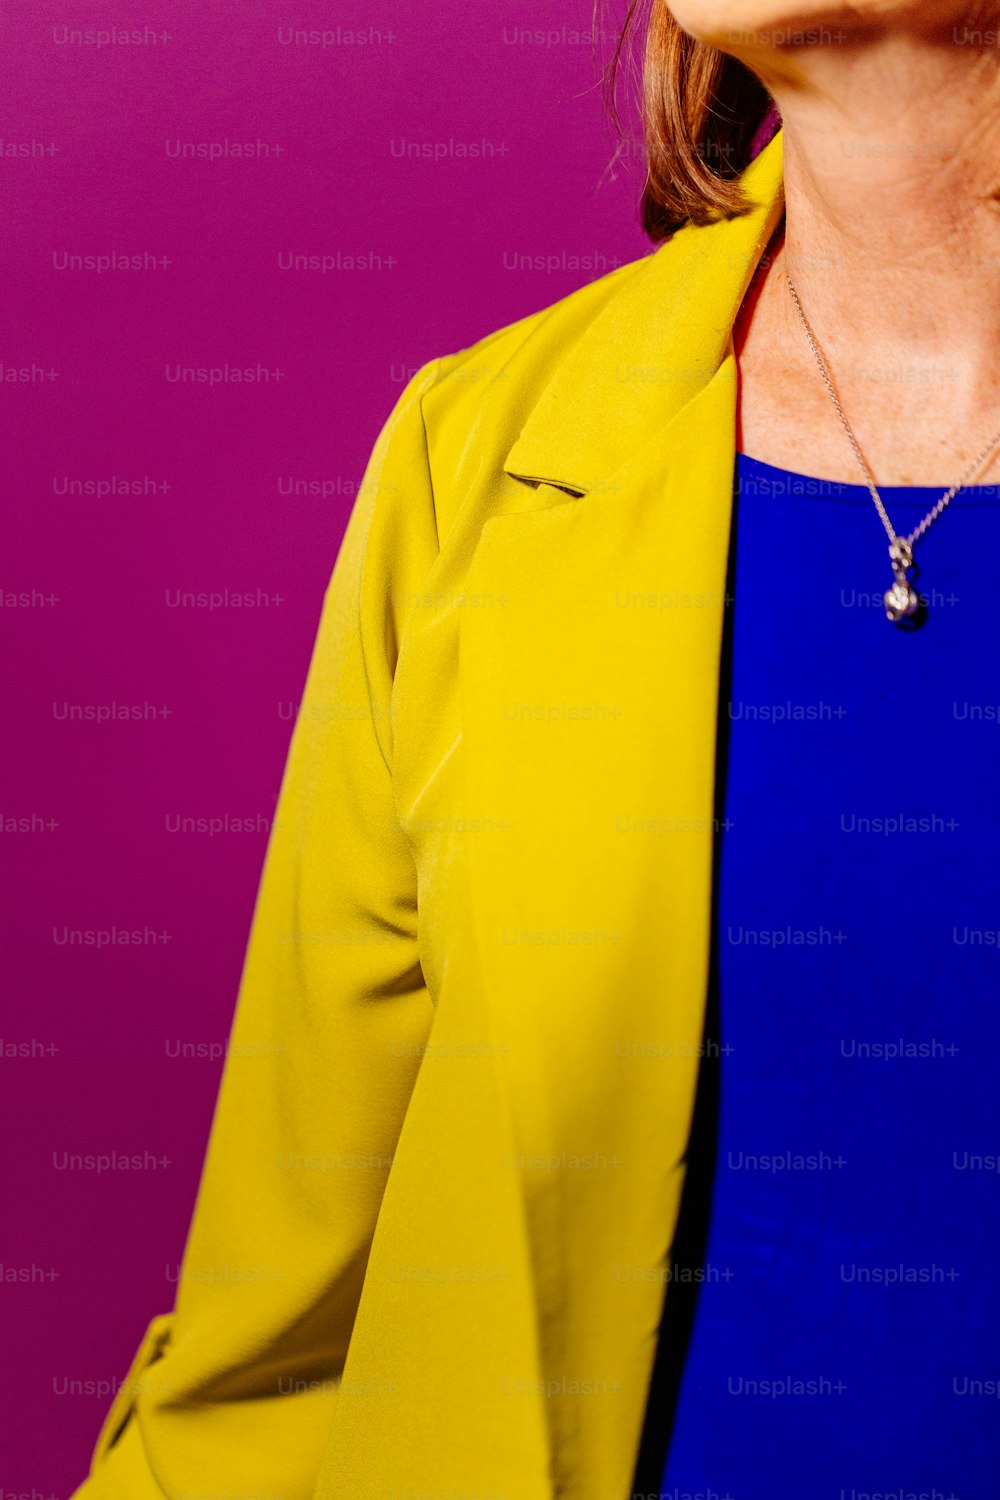 a woman in a blue top and yellow jacket